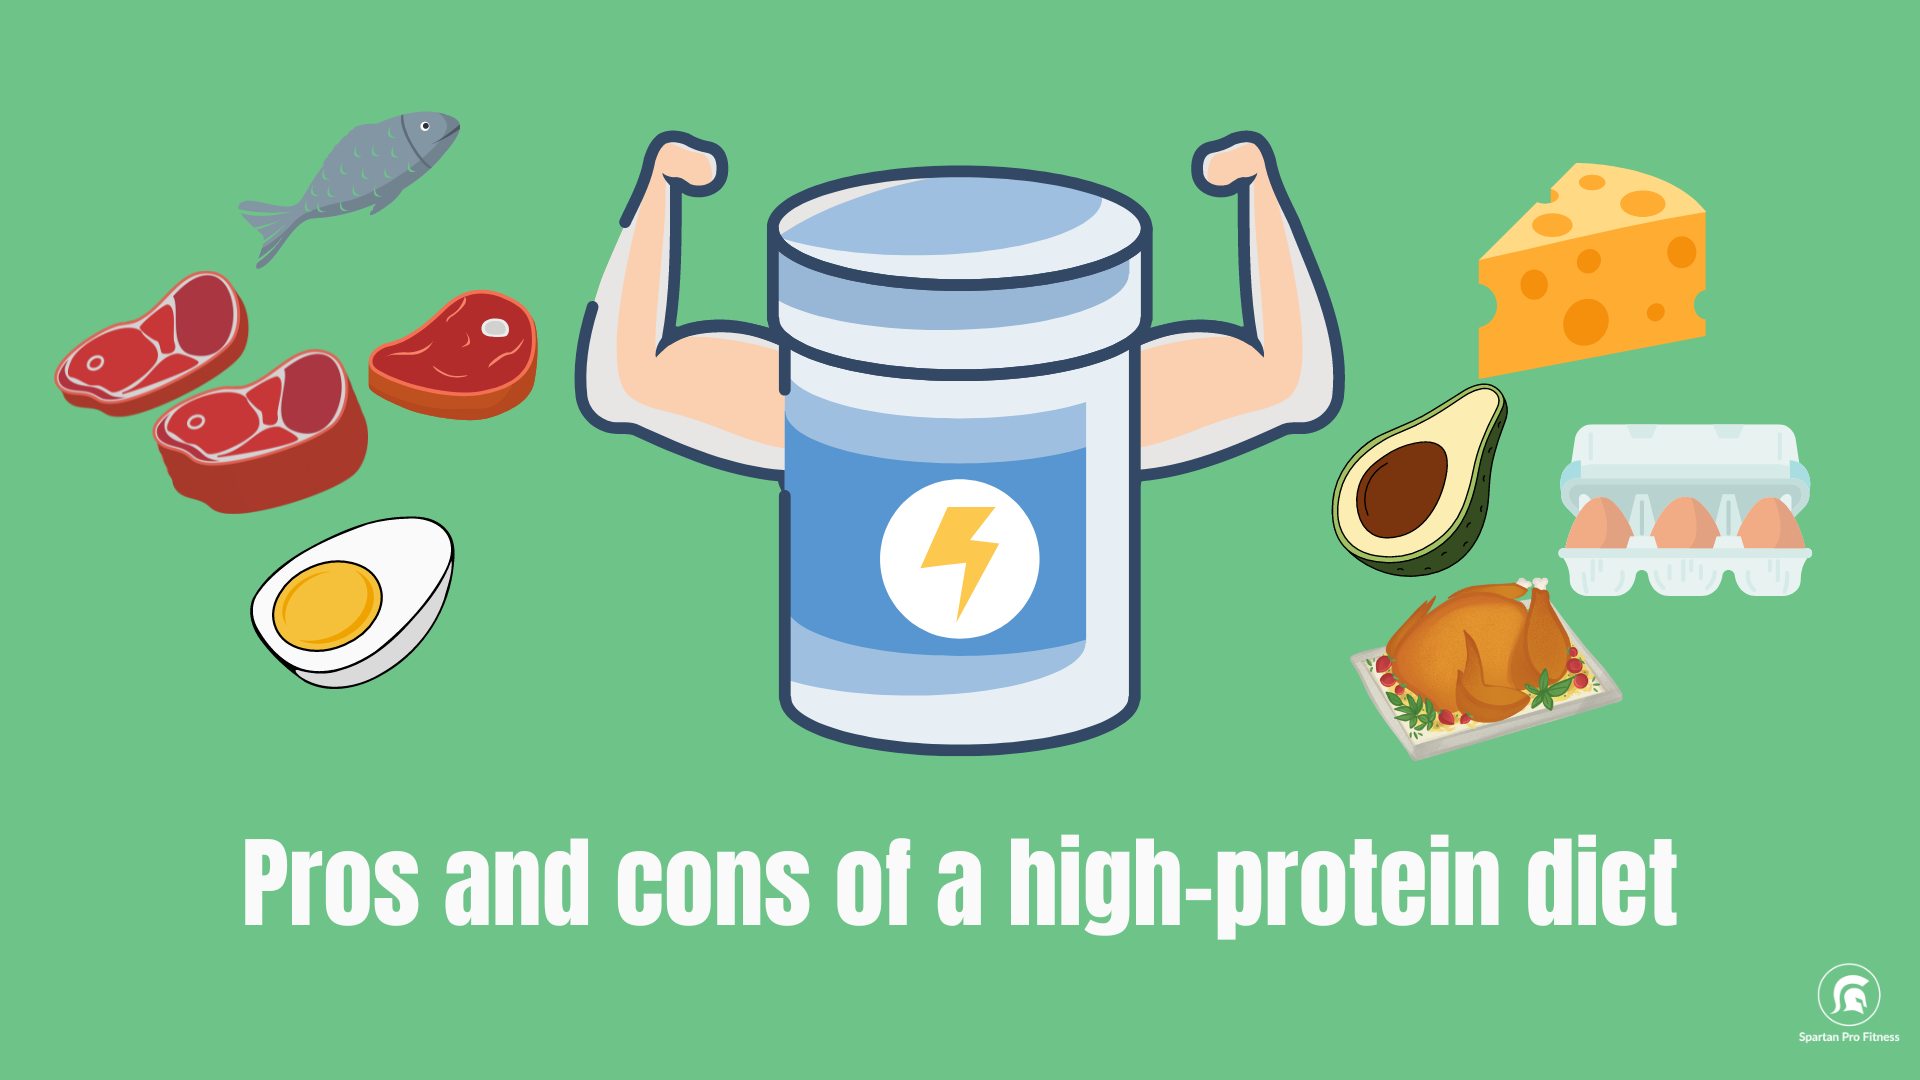 Pros and cons of a high-protein diet